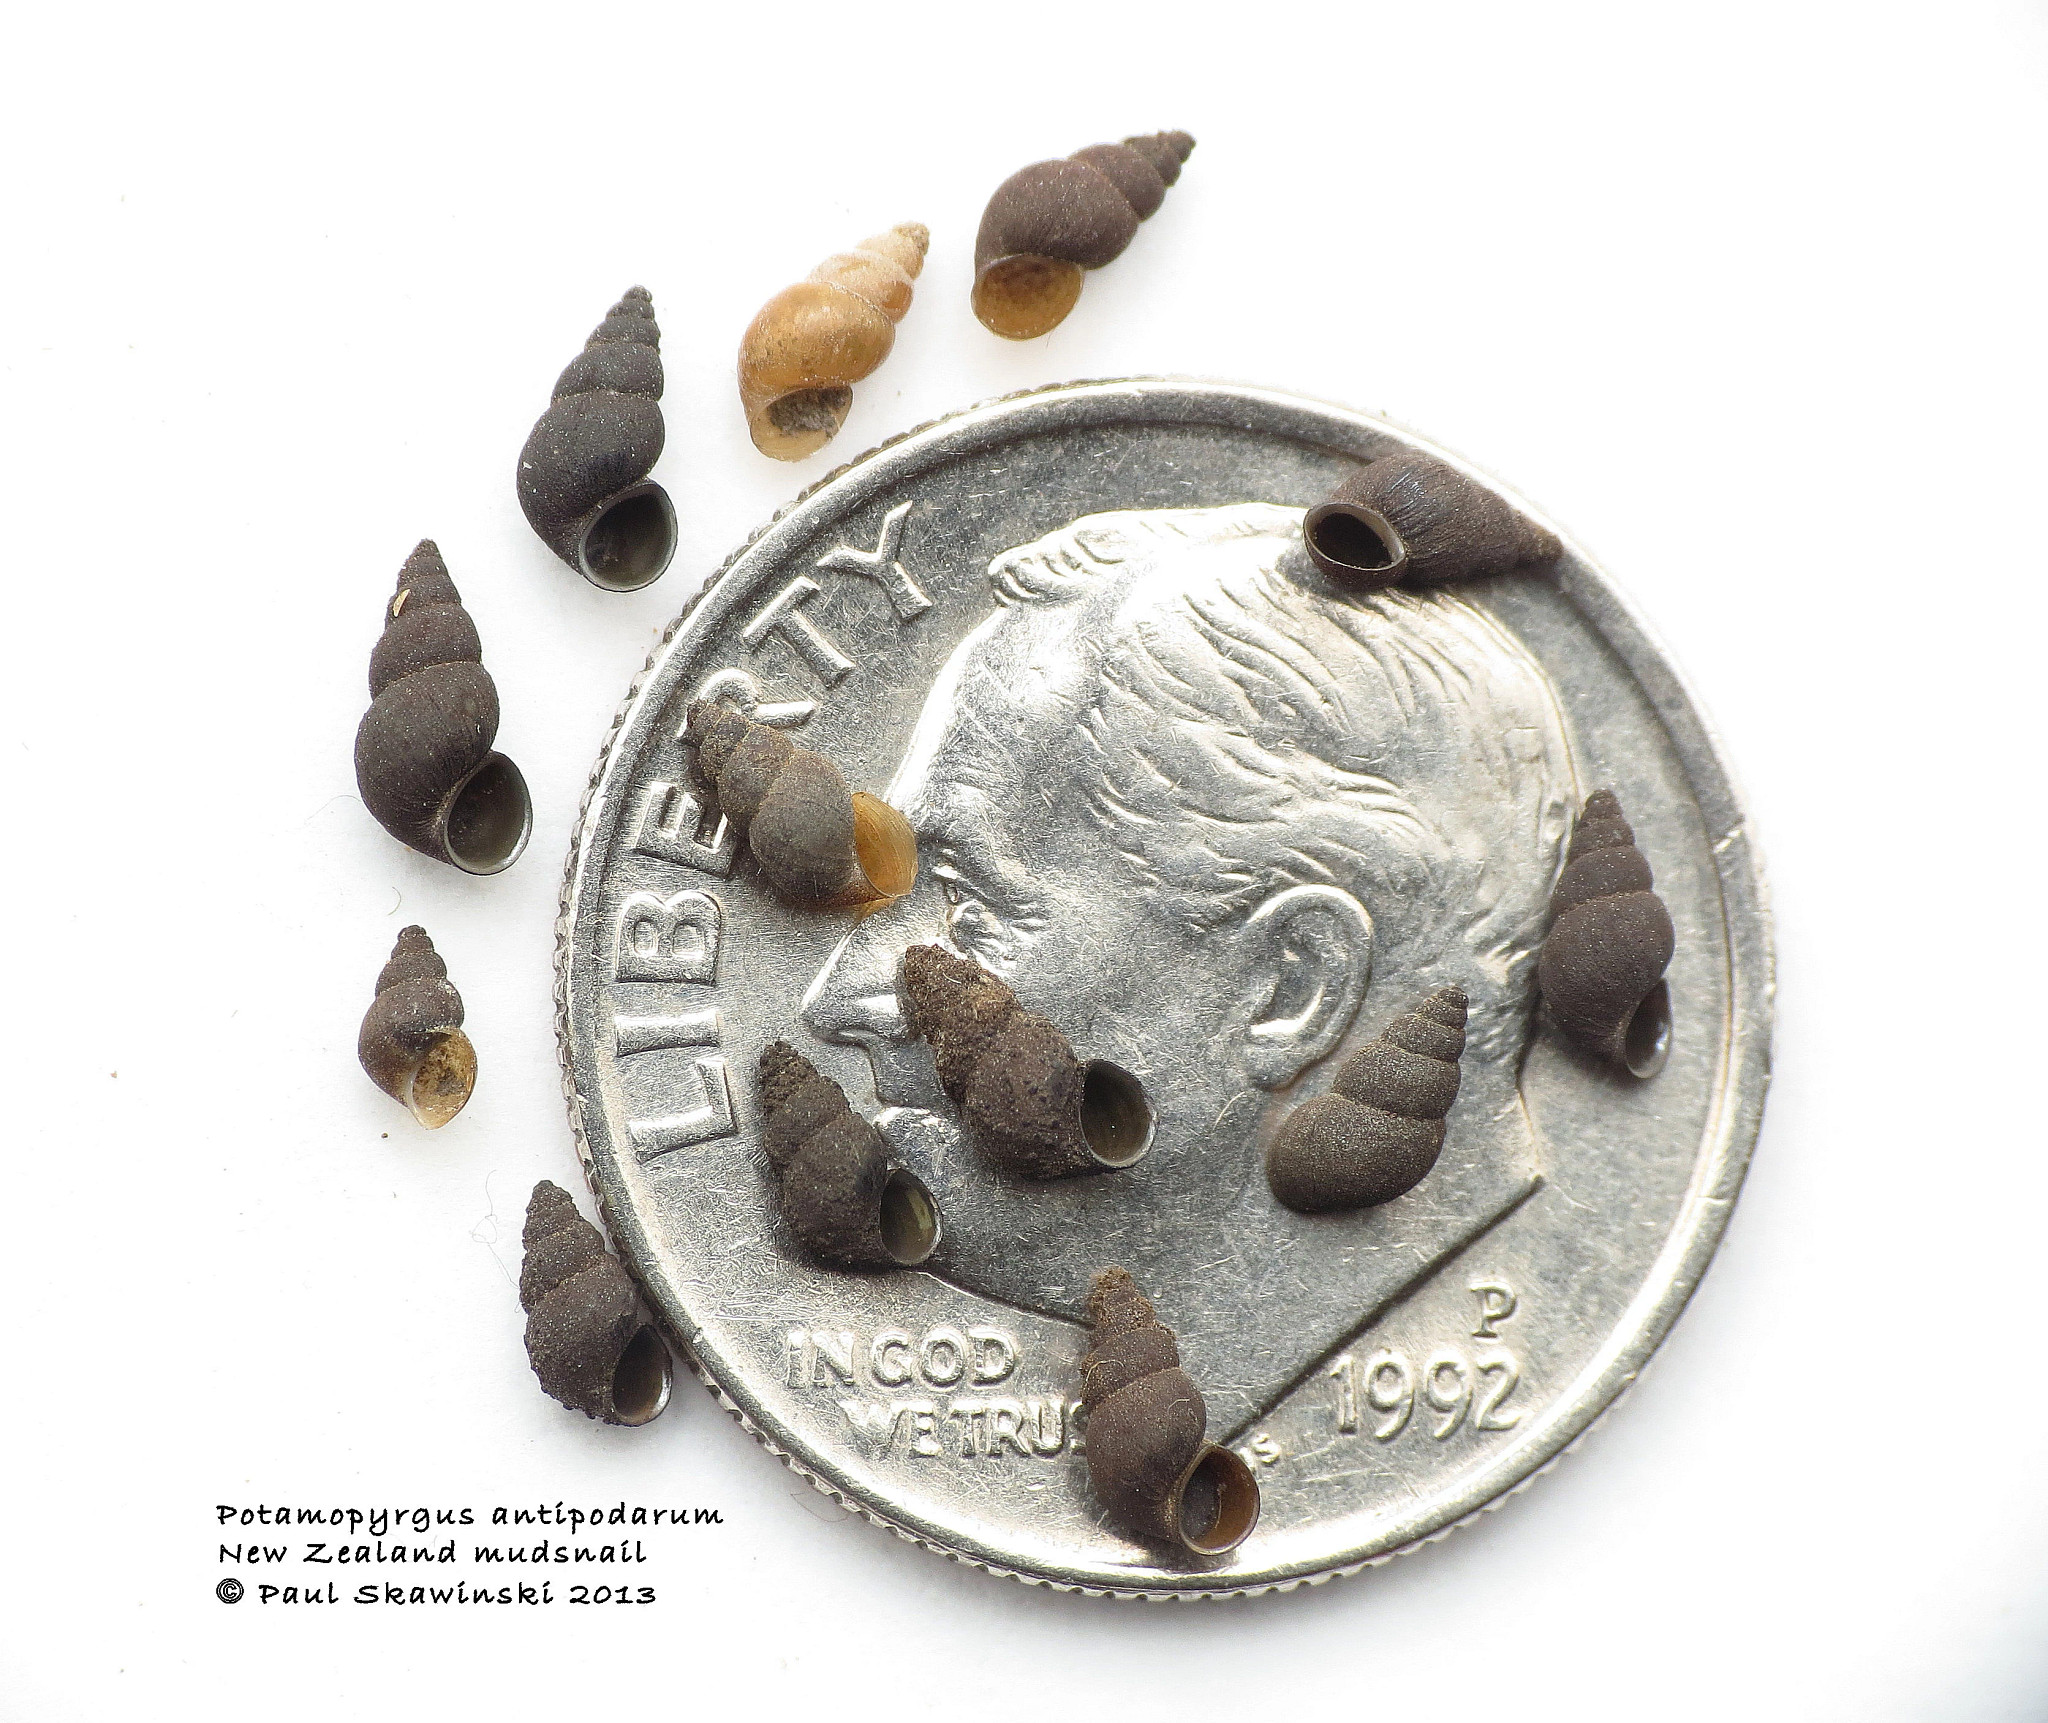 A number of New Zealand mudsnails shown as tiny in comparison to a U.S. dime. 